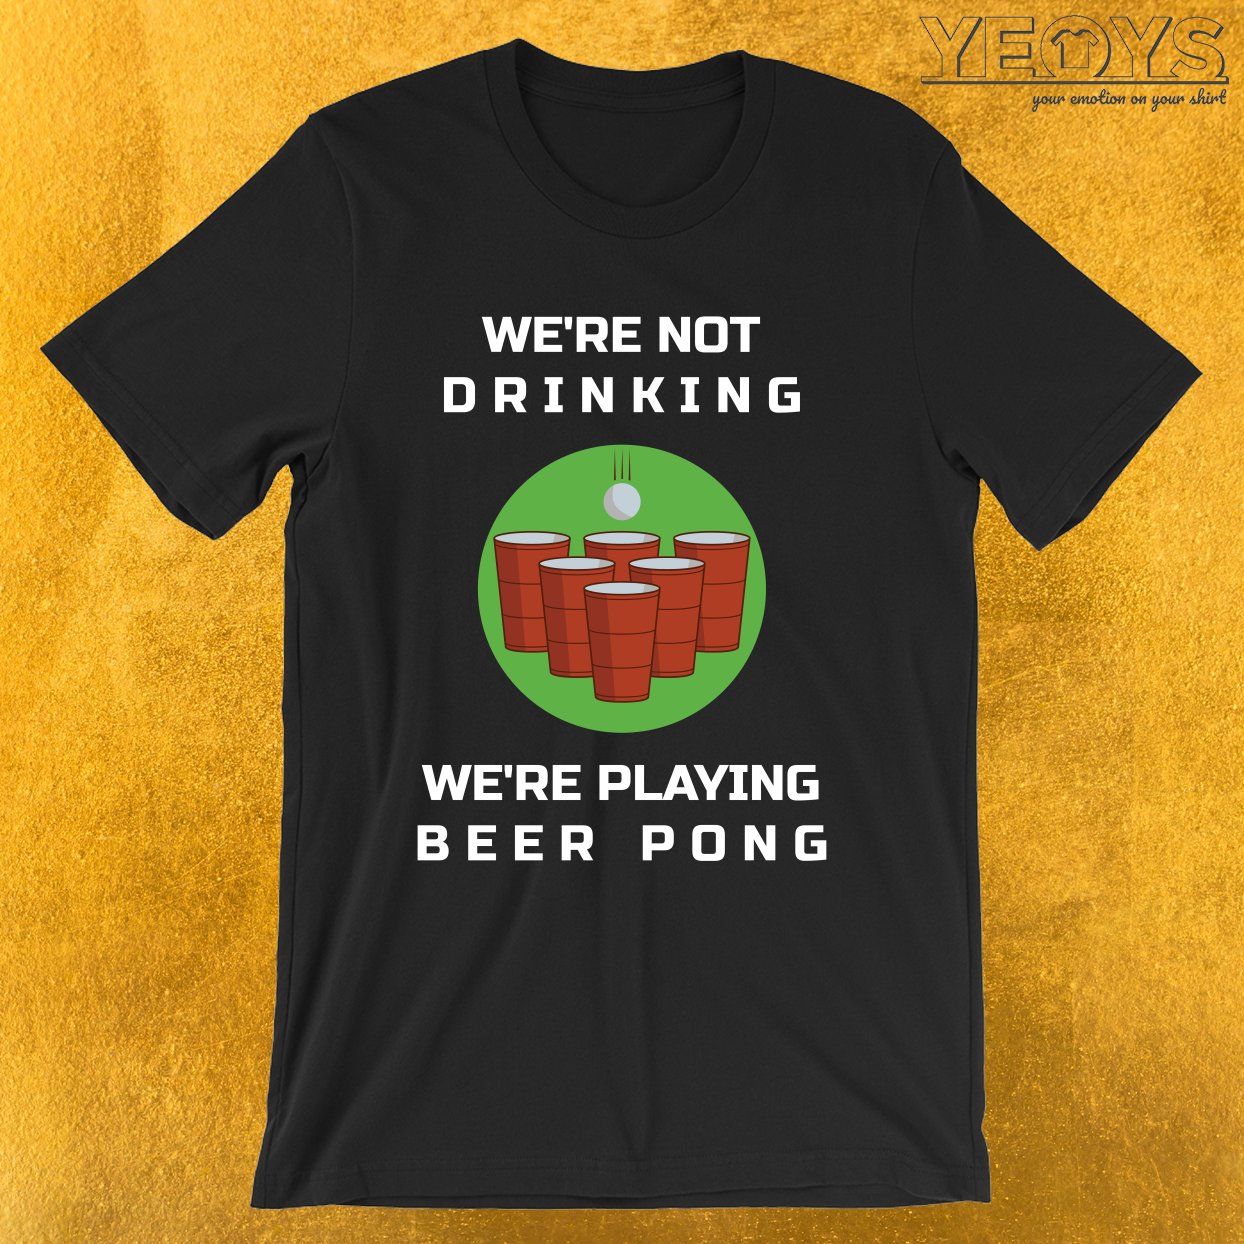 We’re Not Drinking We’re Playing Beer Pong – Funny Beer Pong Tee